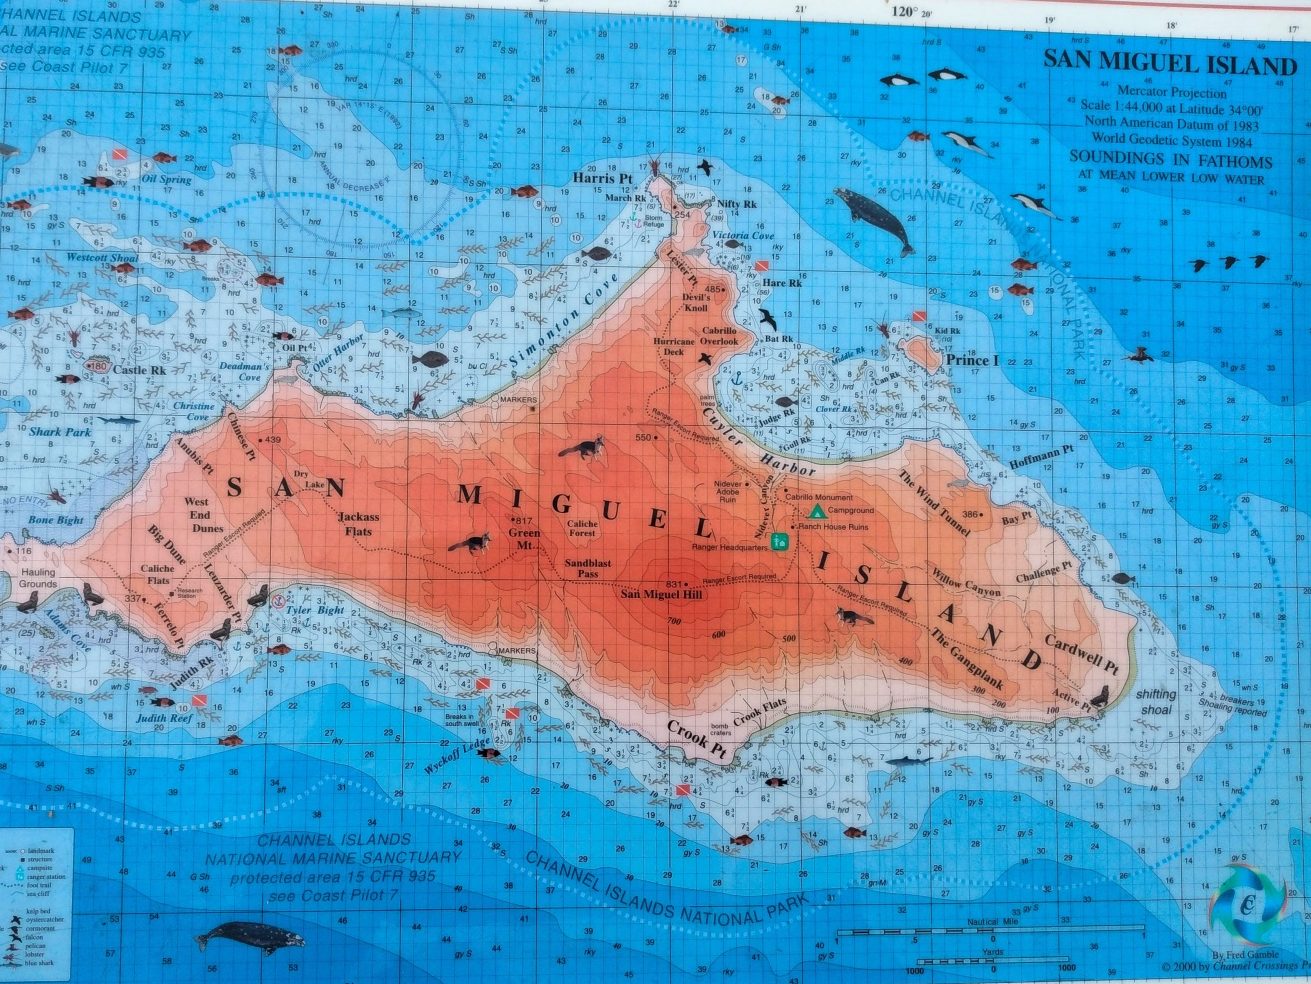 San Miguel island topographical map